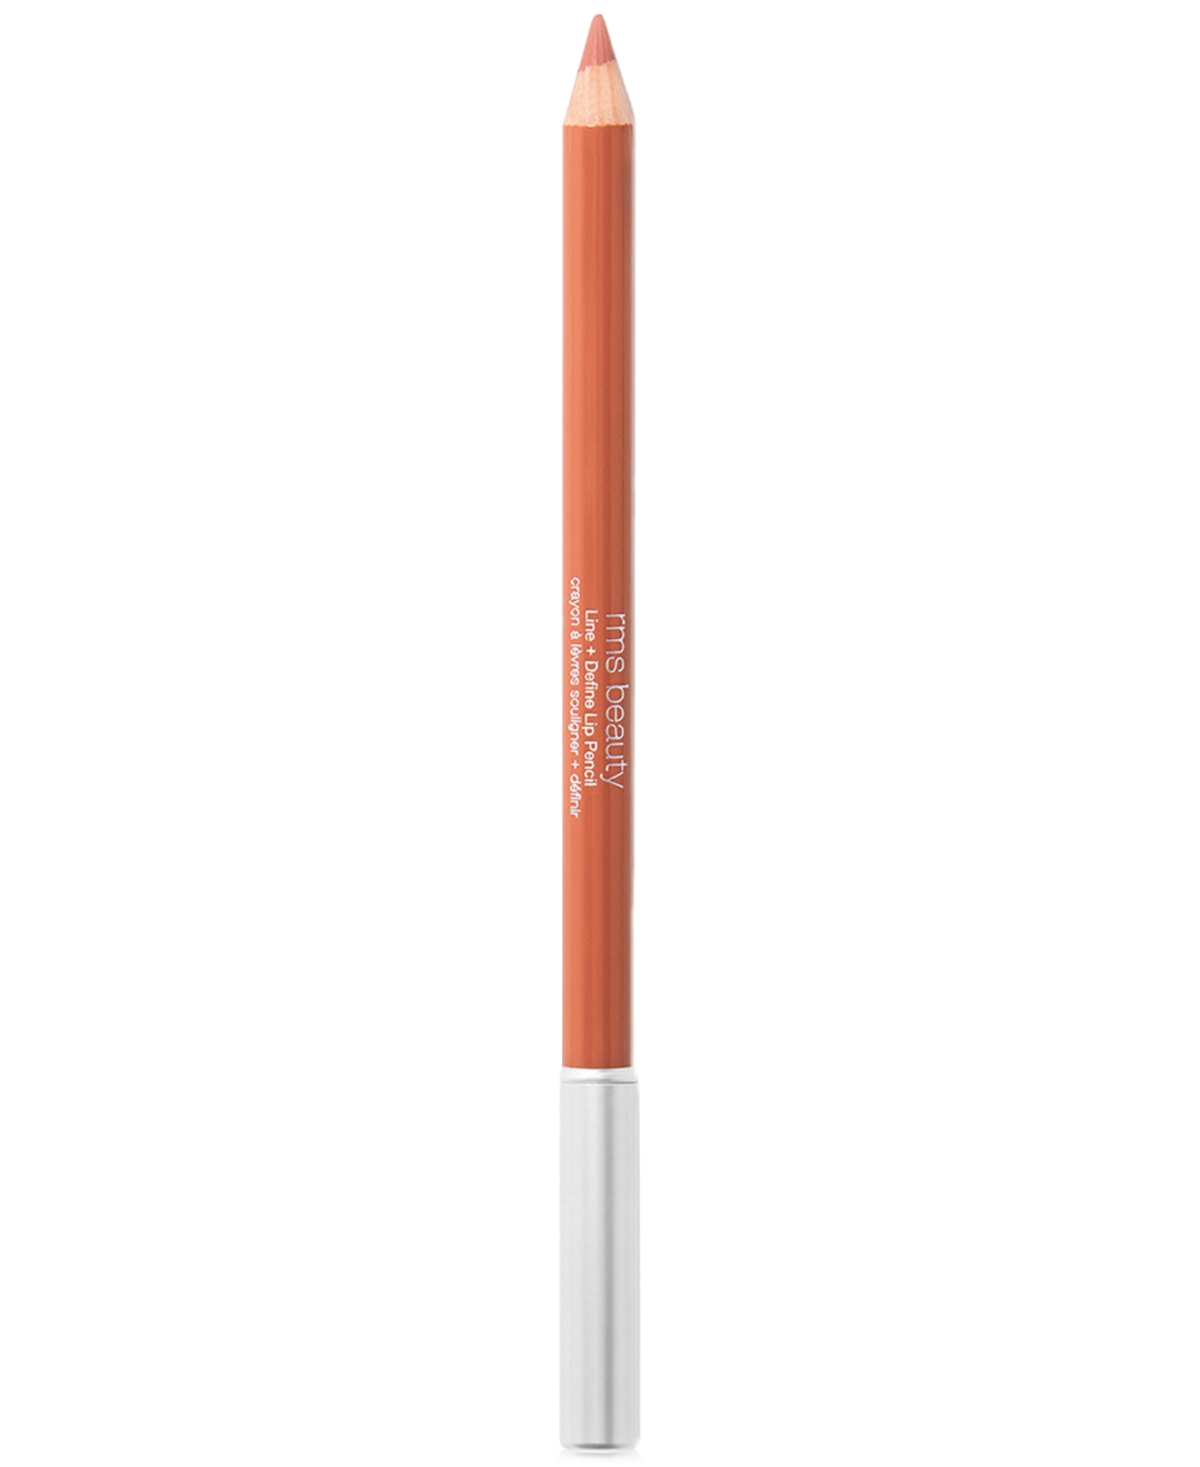 Rms Beauty Go Nude Lip Pencil In Daytime Nude